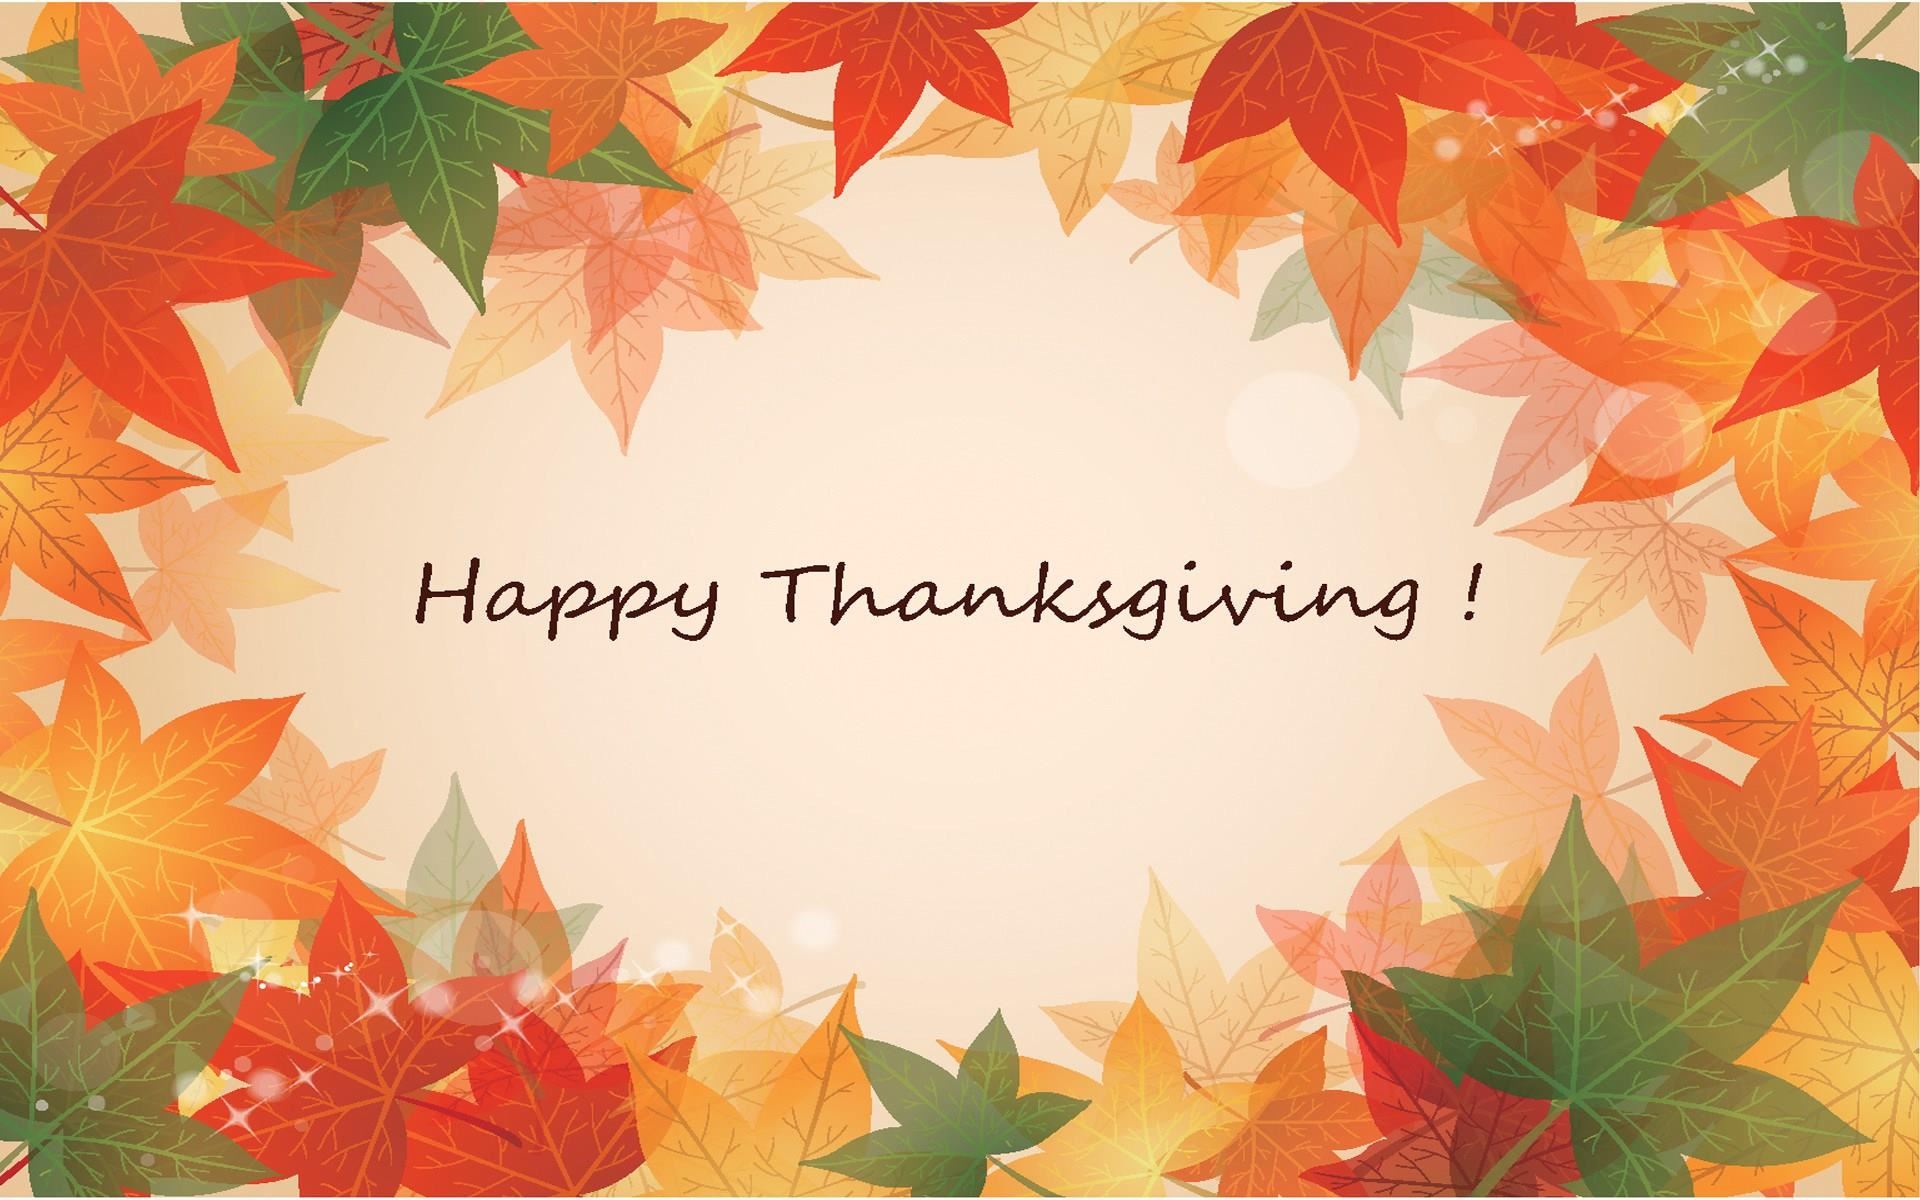 Happy Thanksgiving wishes | Fotolip.com Rich image and wallpaper1920 x 1200